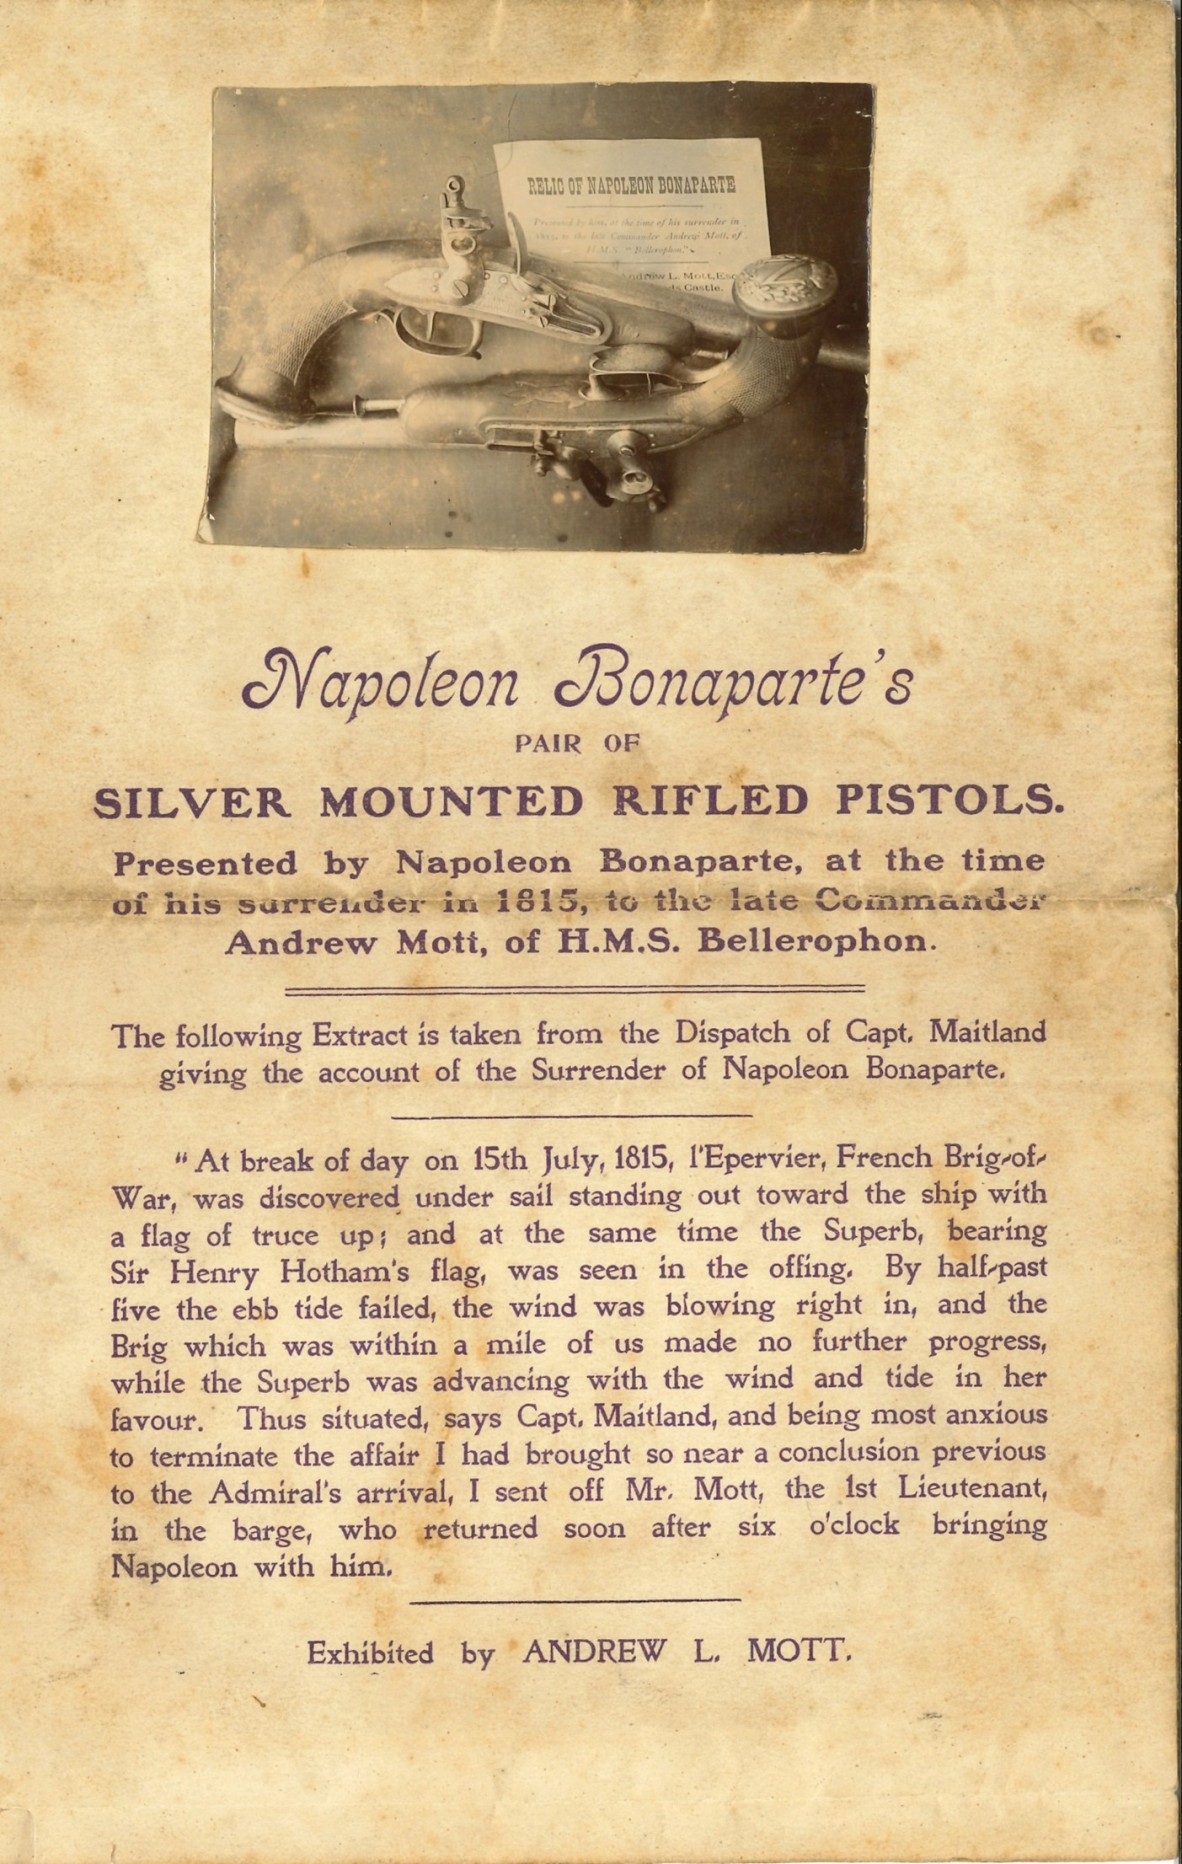 Napoleon Bonapartes pair of silver mounted rifled pistols Pamphlet accompanying the items for the Royal Naval Exhibition held at Chelsea 2nd May 1891